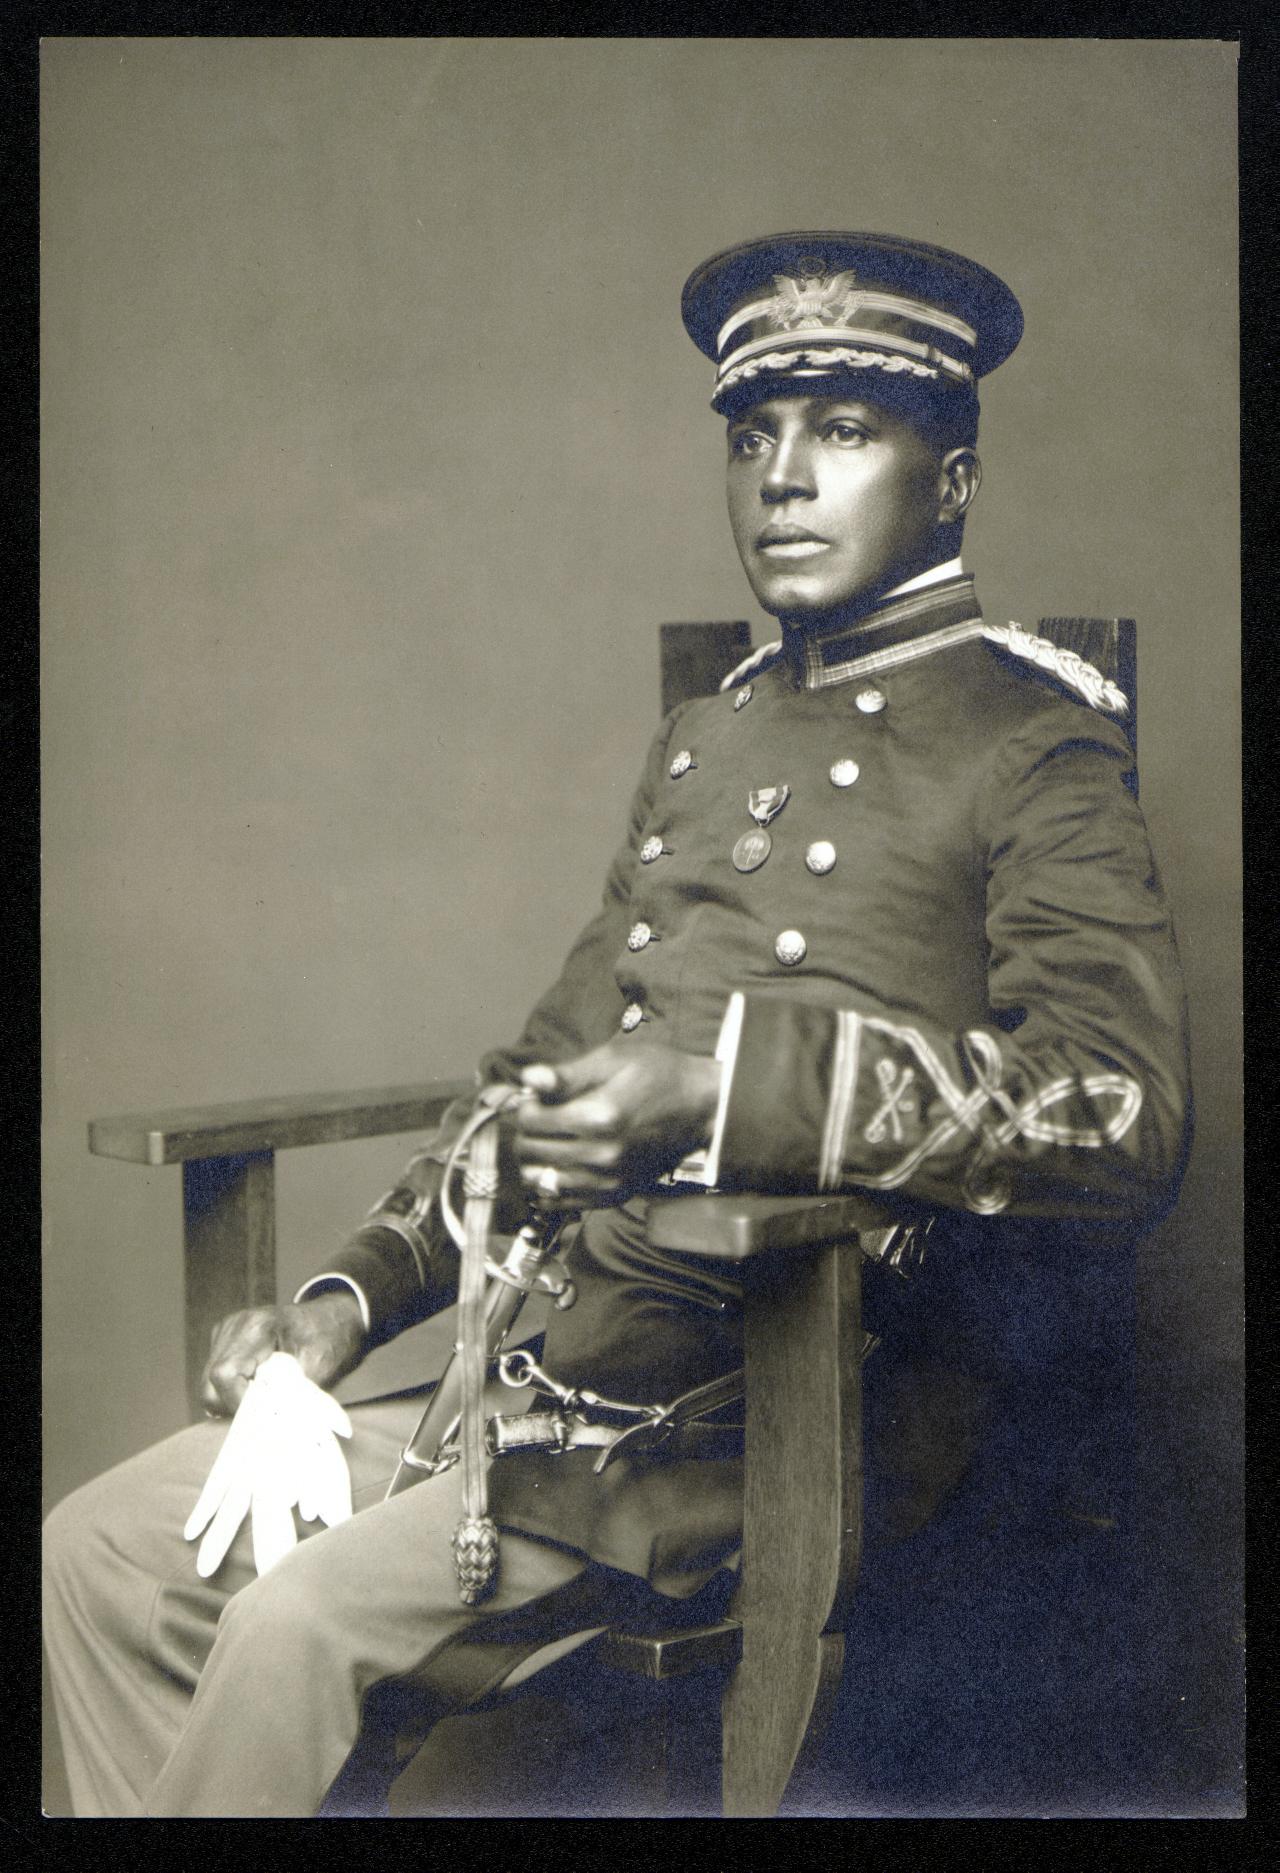 An African American man in a military uniform holding a sabre and wearing a cap sitting in a chair